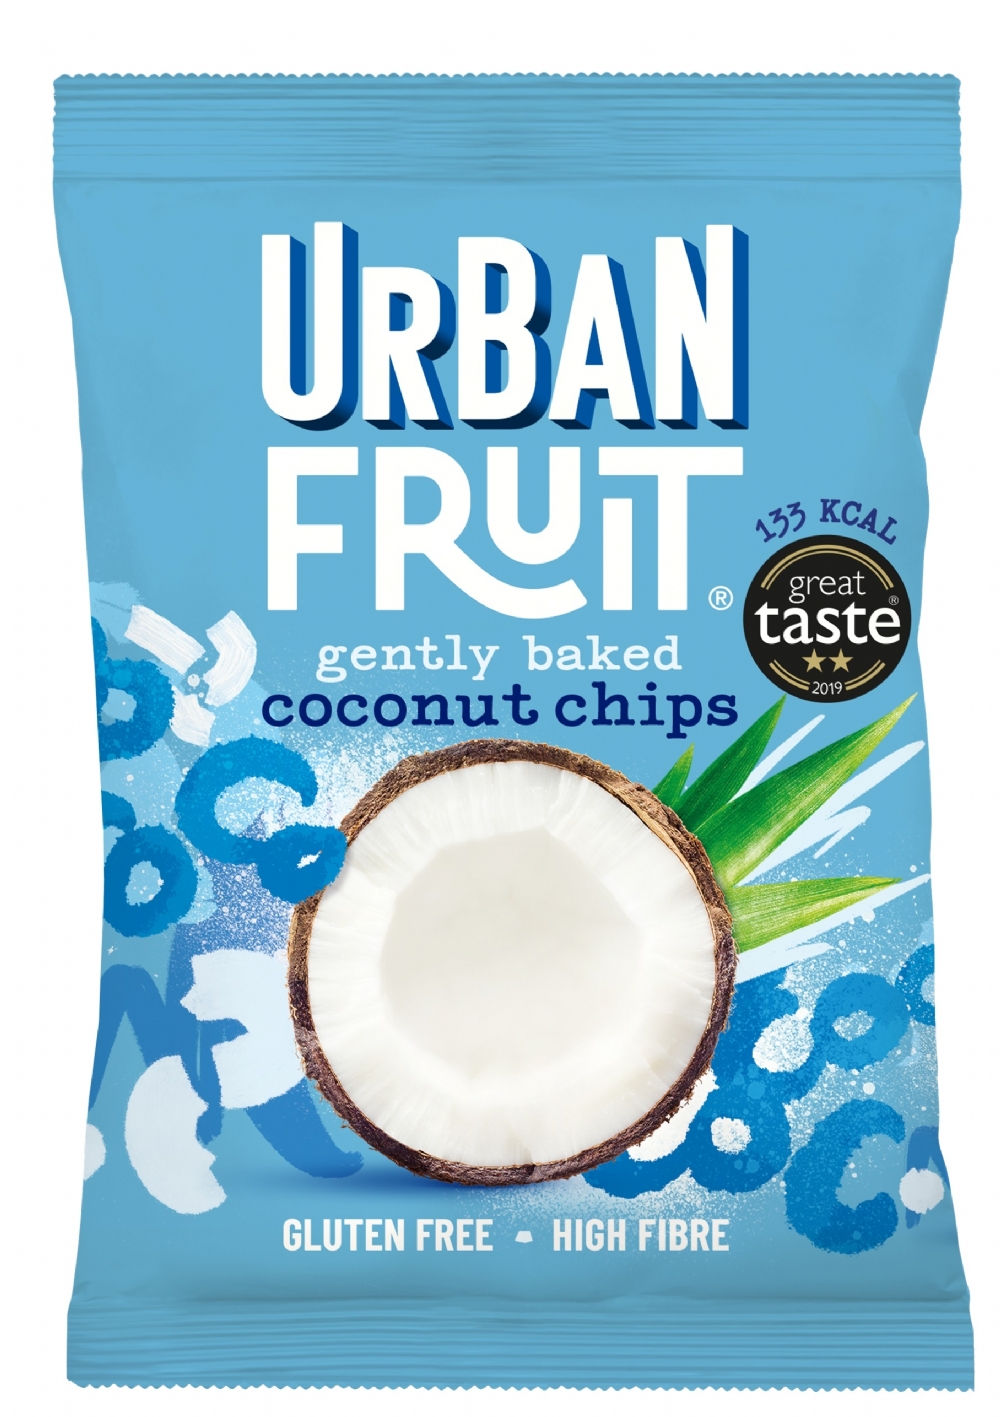 URBAN FRUIT Gently Baked Coconut Chips 25g